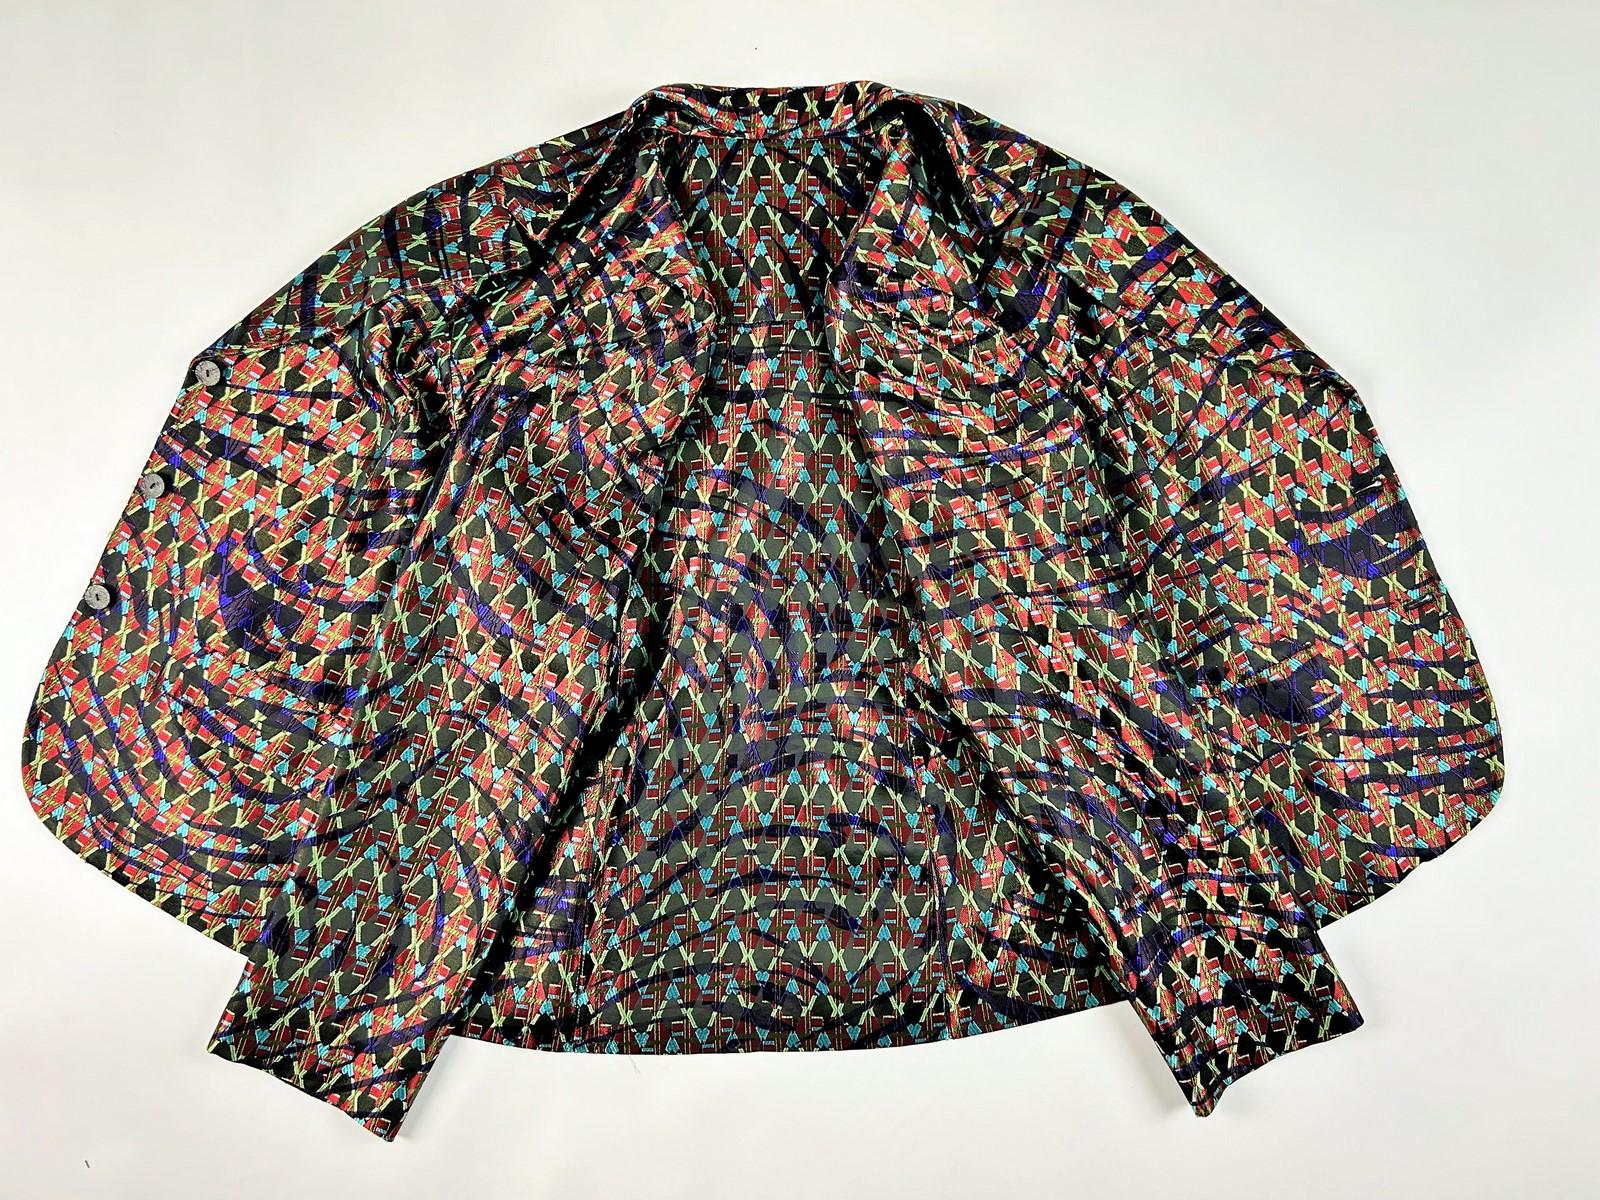 Art Deco-inspired lamé jacket by Christian Lacroix Circa 2000 For Sale 10